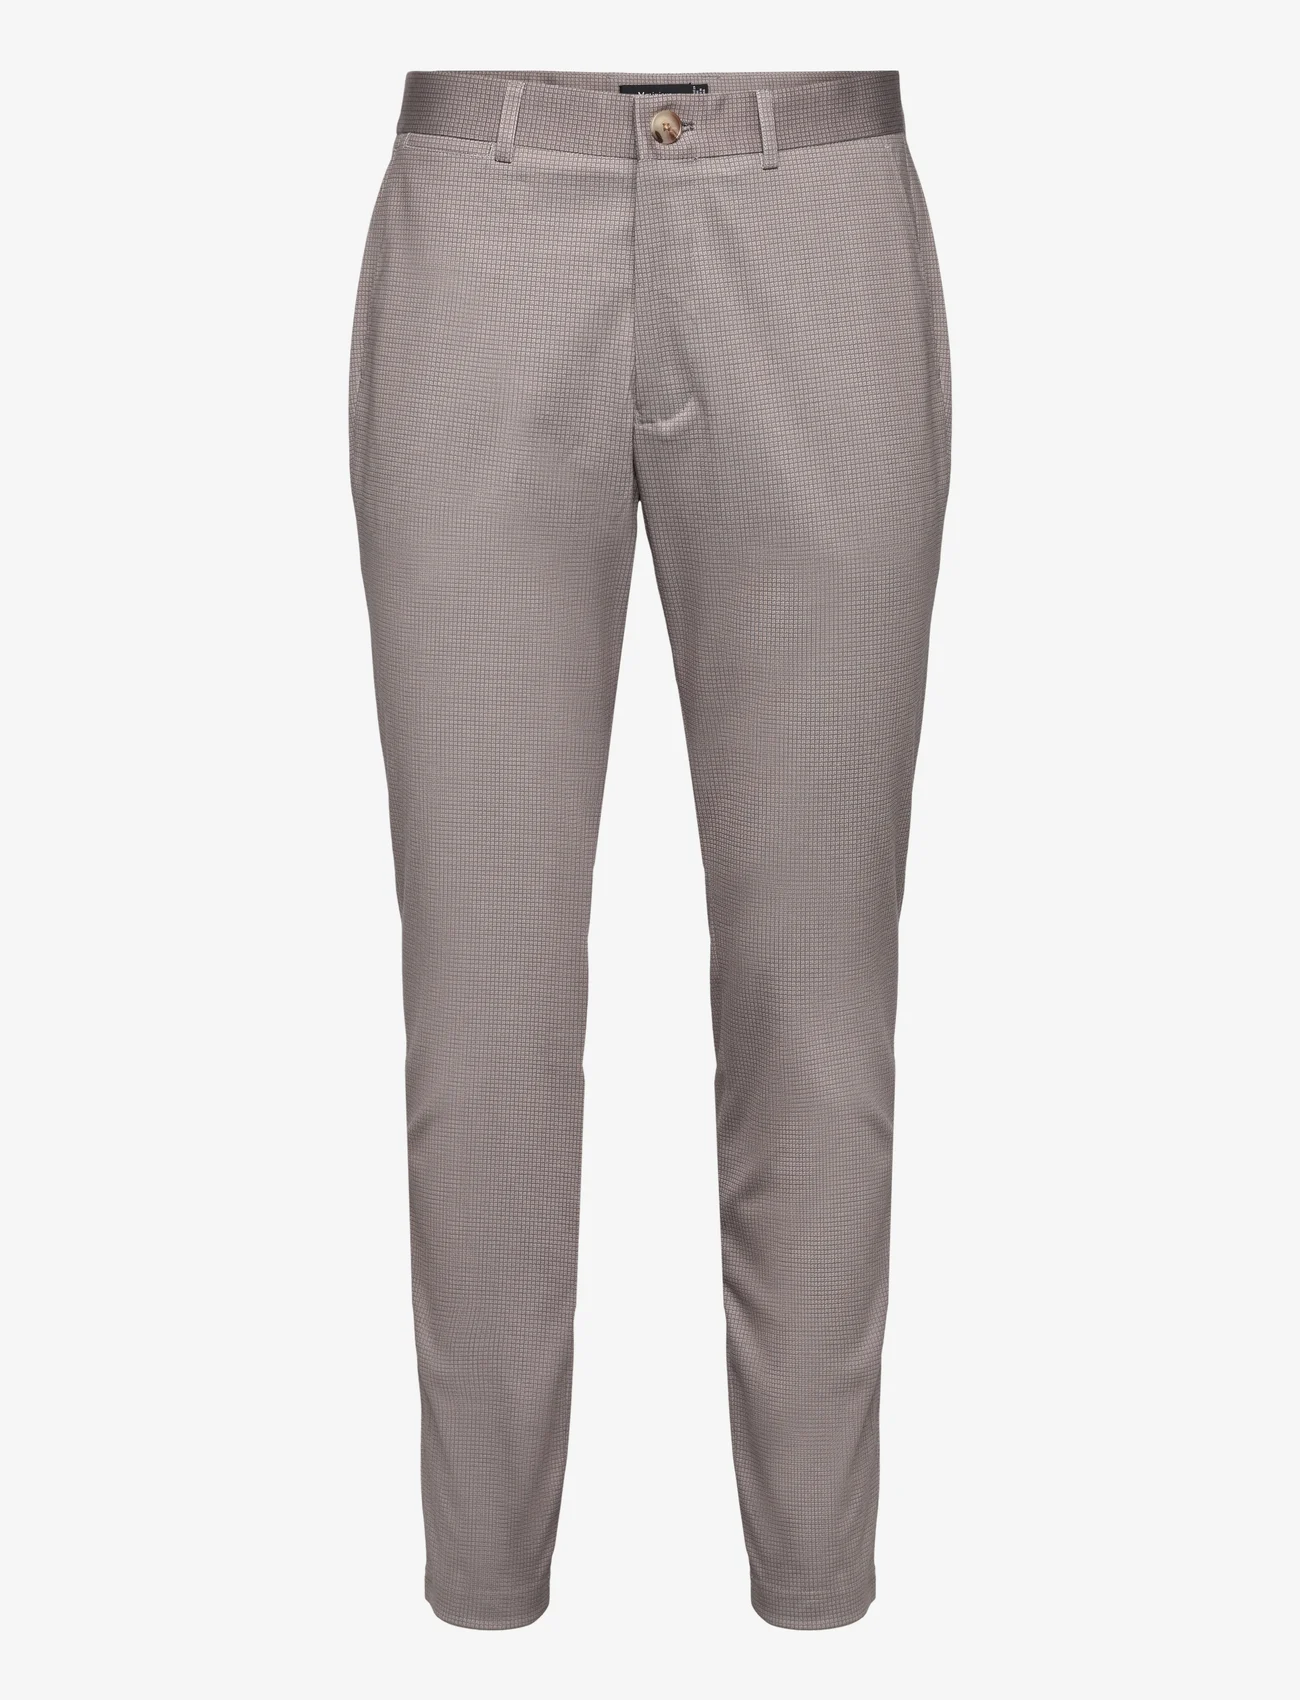 Matinique - MAliam Jersey Pant - formal trousers - winter twig - 0